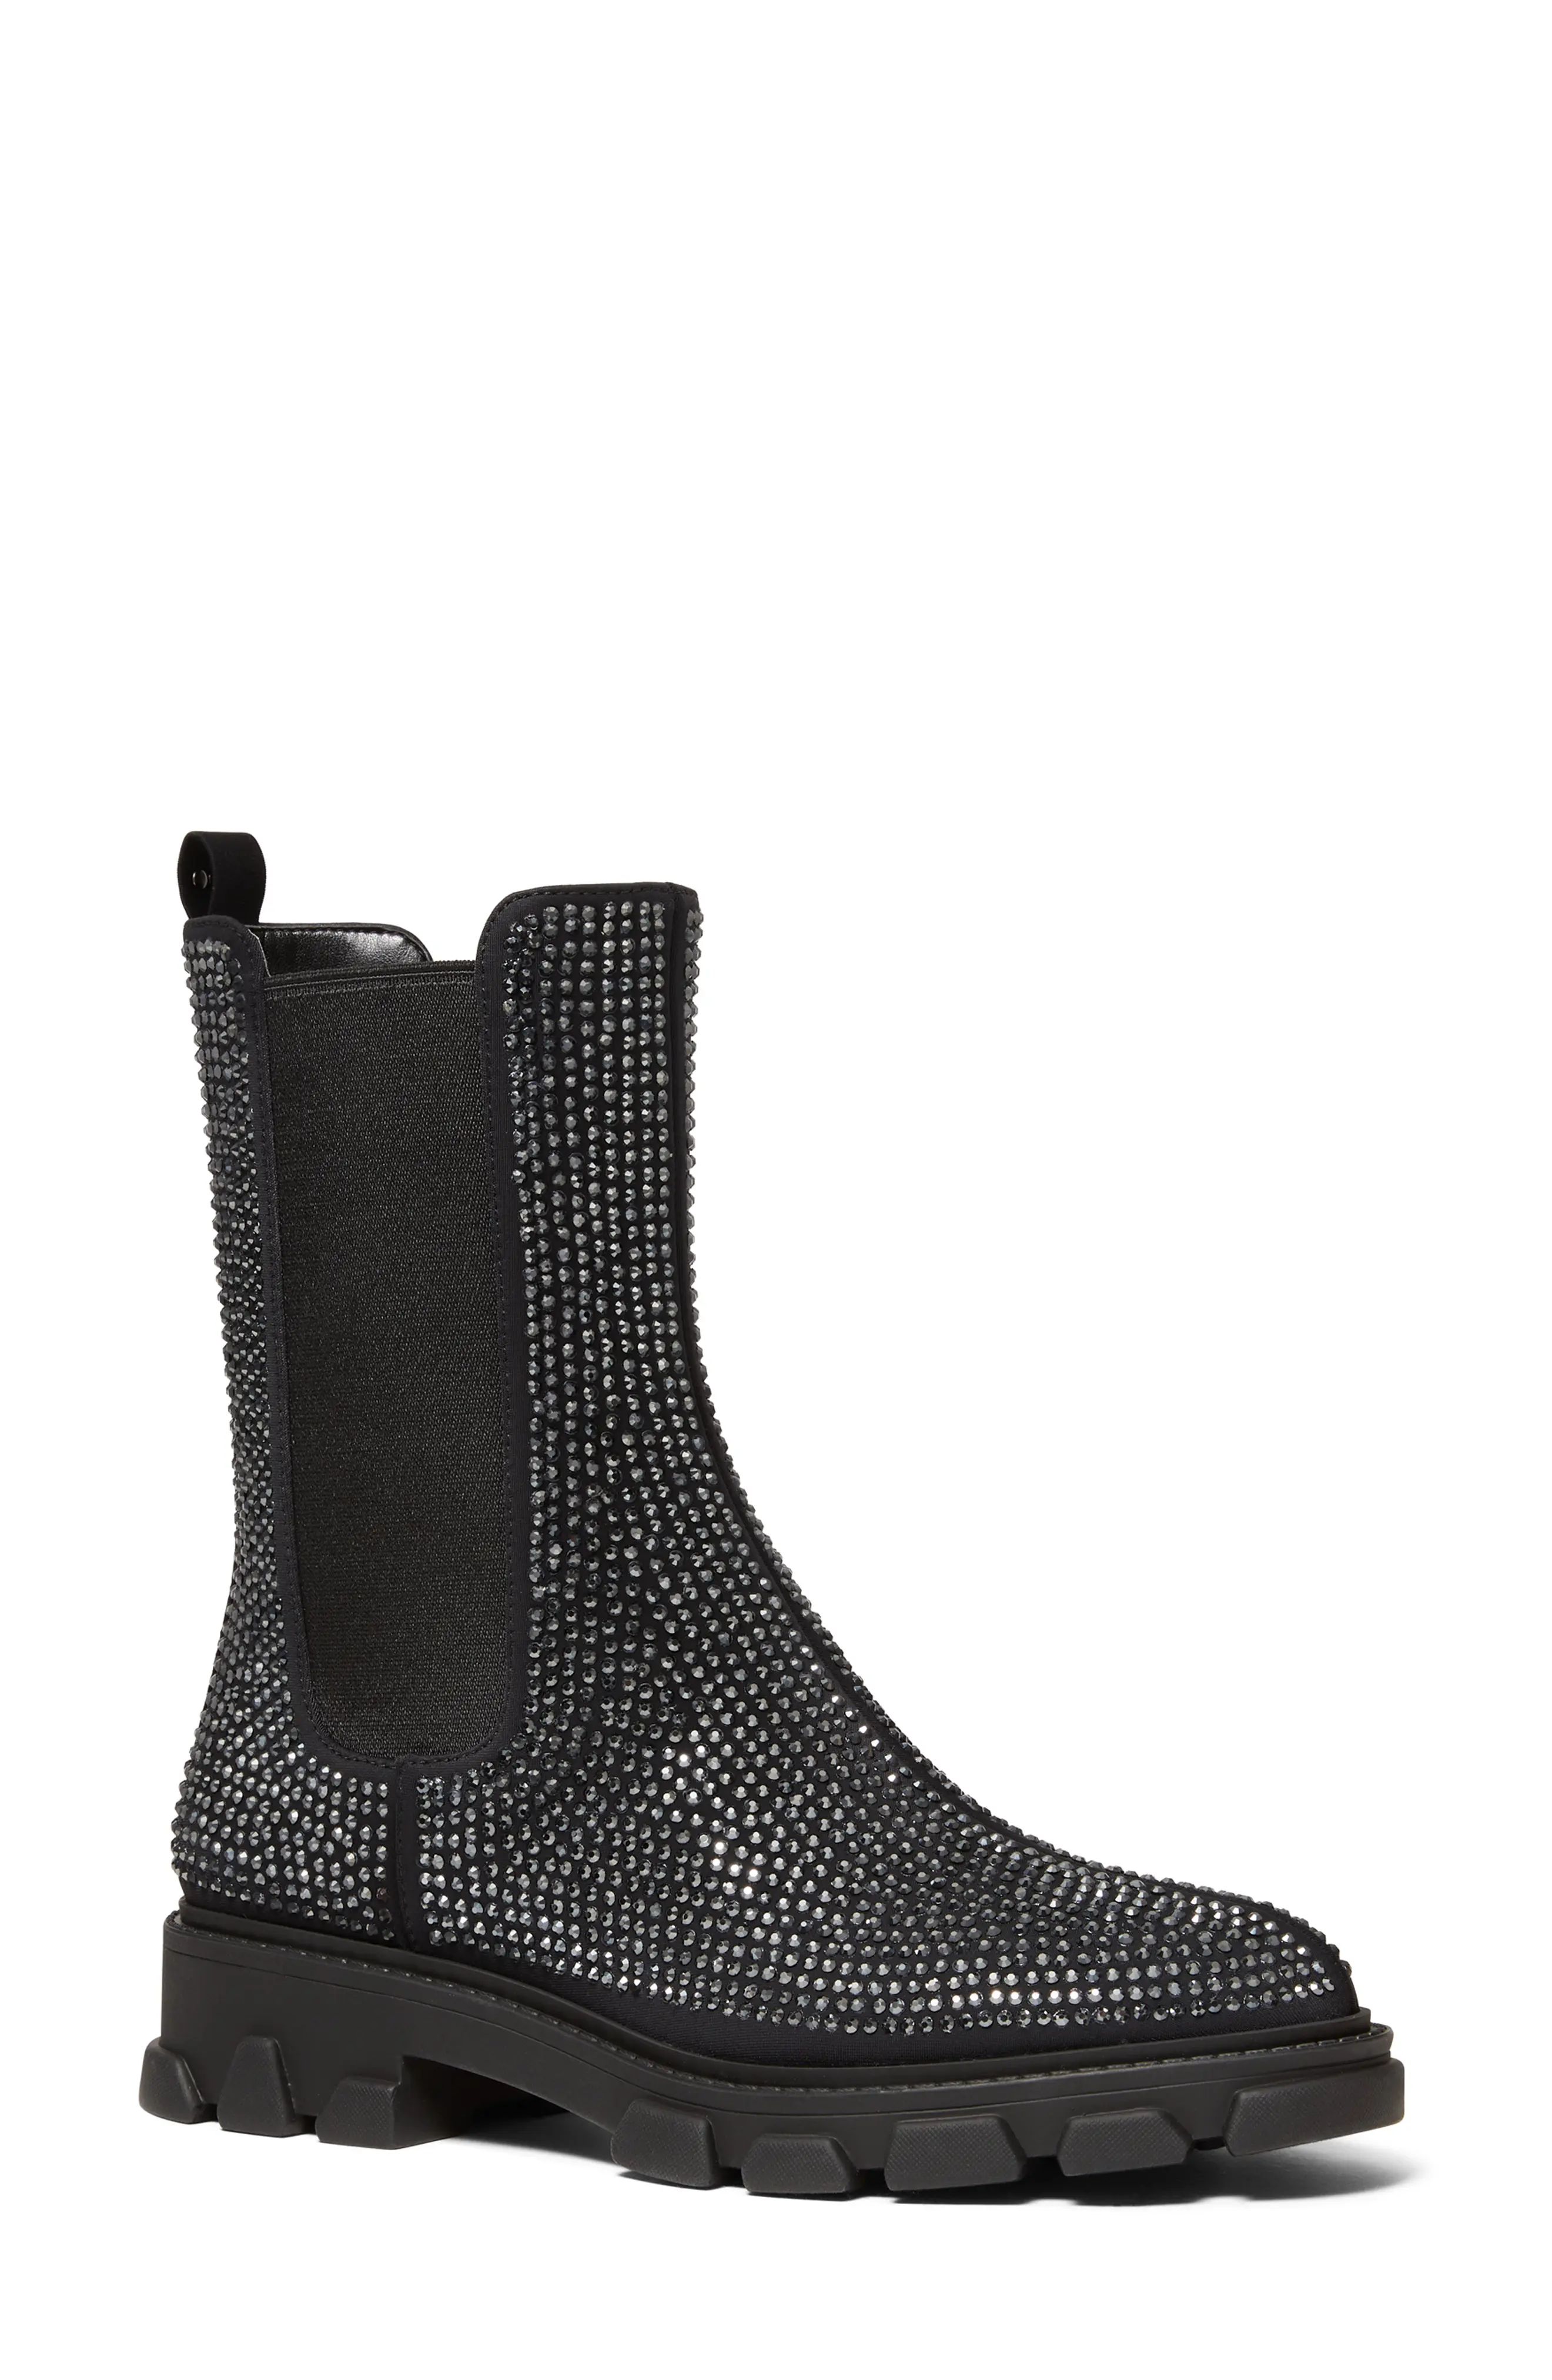 MICHAEL Michael Kors Ridley Chelsea Boot in Black at Nordstrom, Size 6.5 | Nordstrom